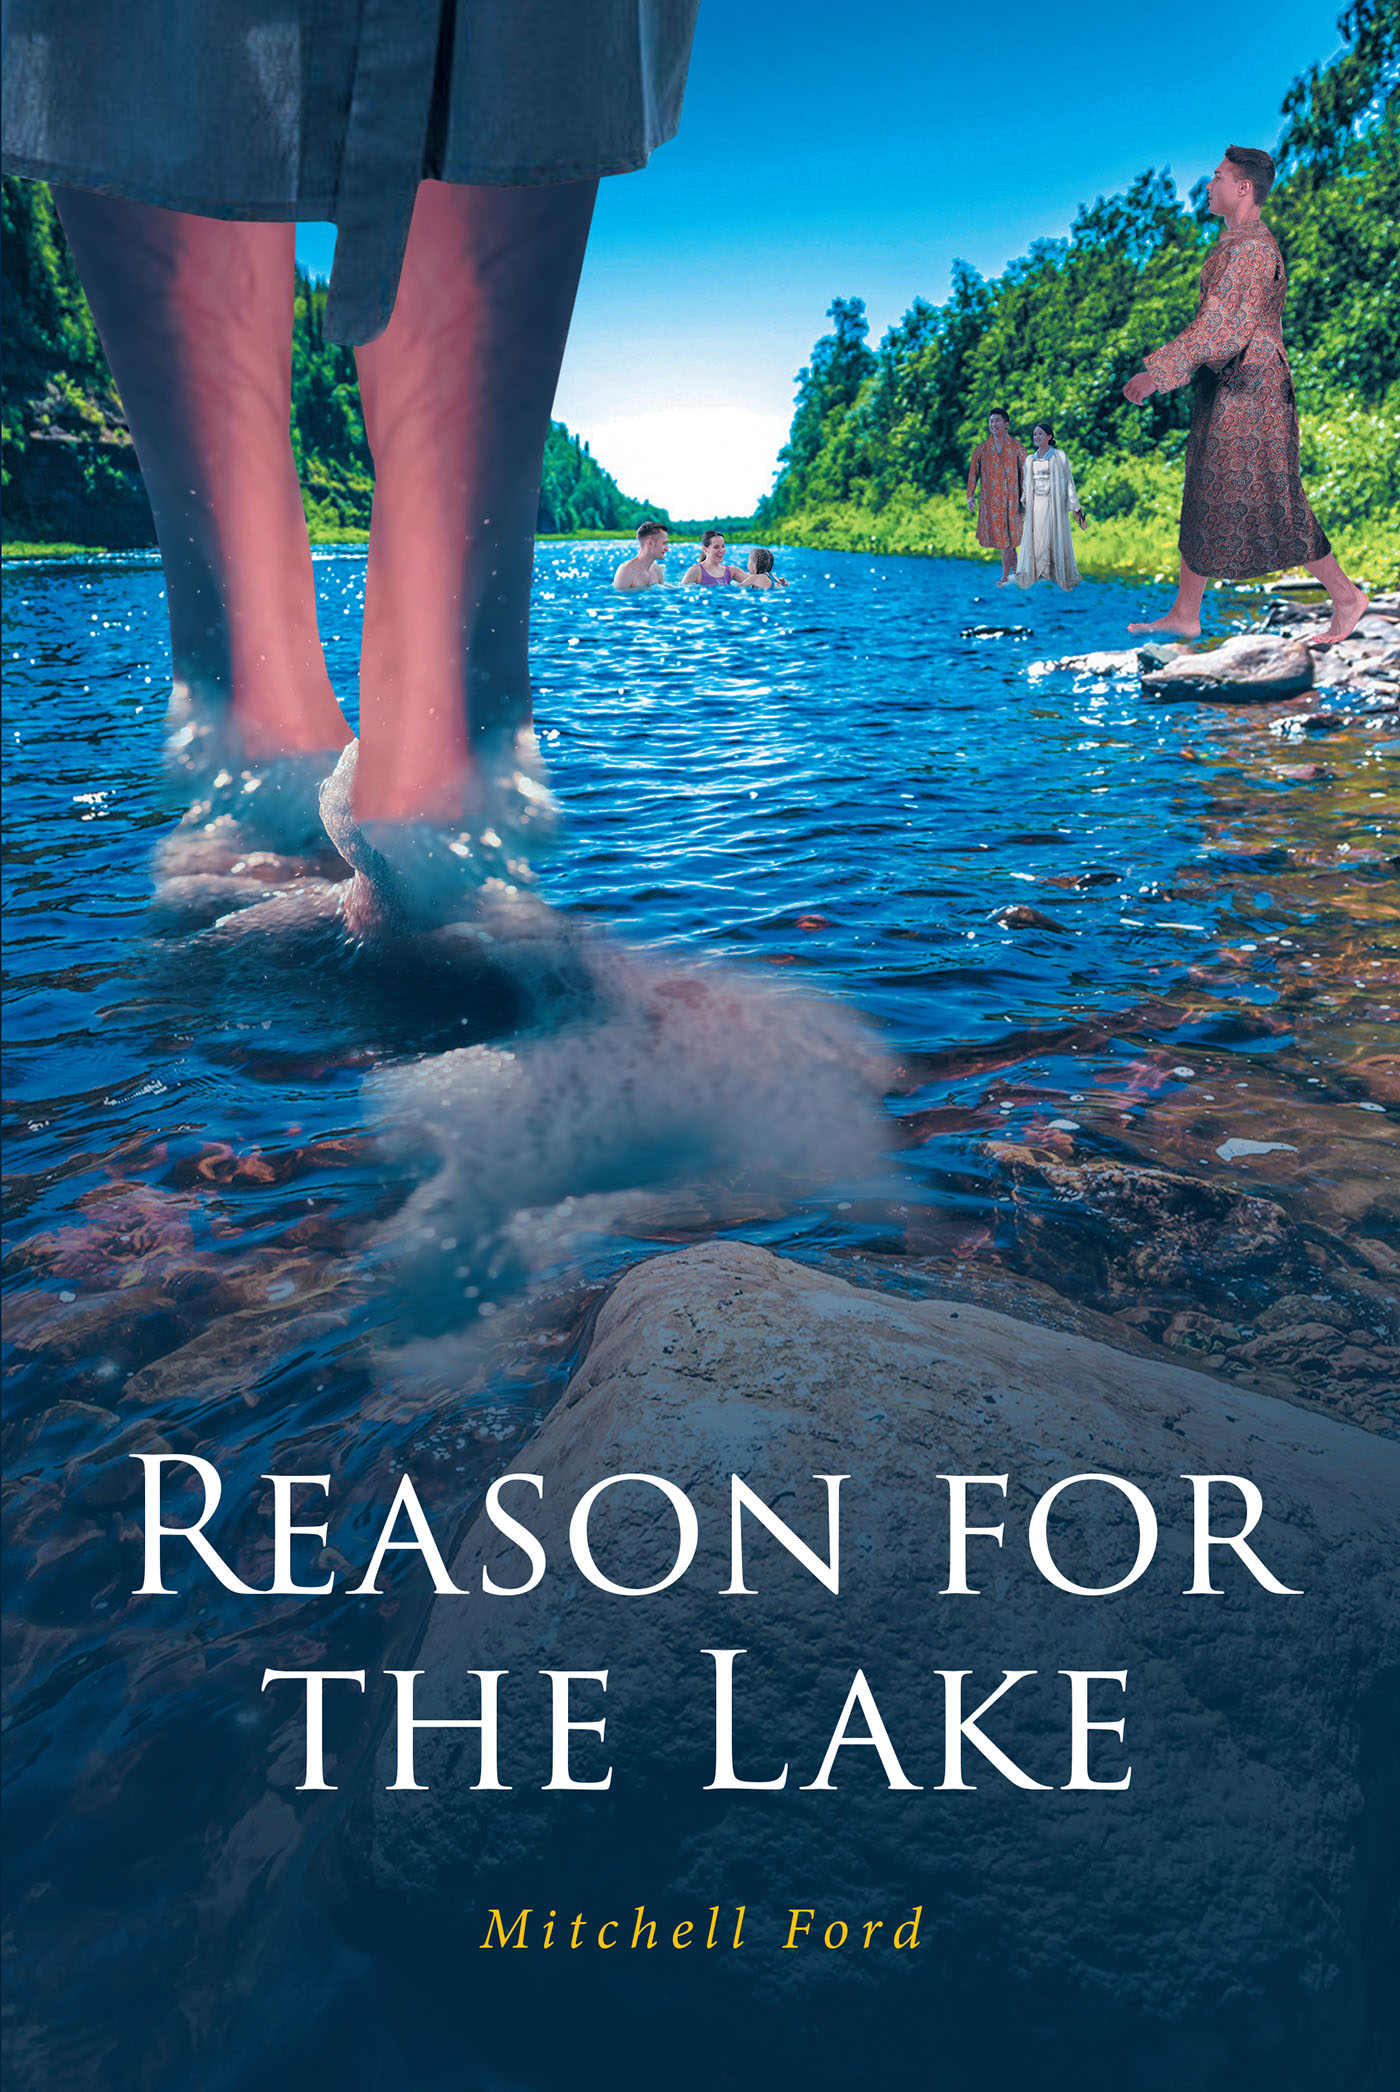 Mitchell Ford’s New Book, "Reason for the Lake," is a Compelling and Thought-Provoking Novel of a Family Who is Reunited Under Extraordinary Circumstances